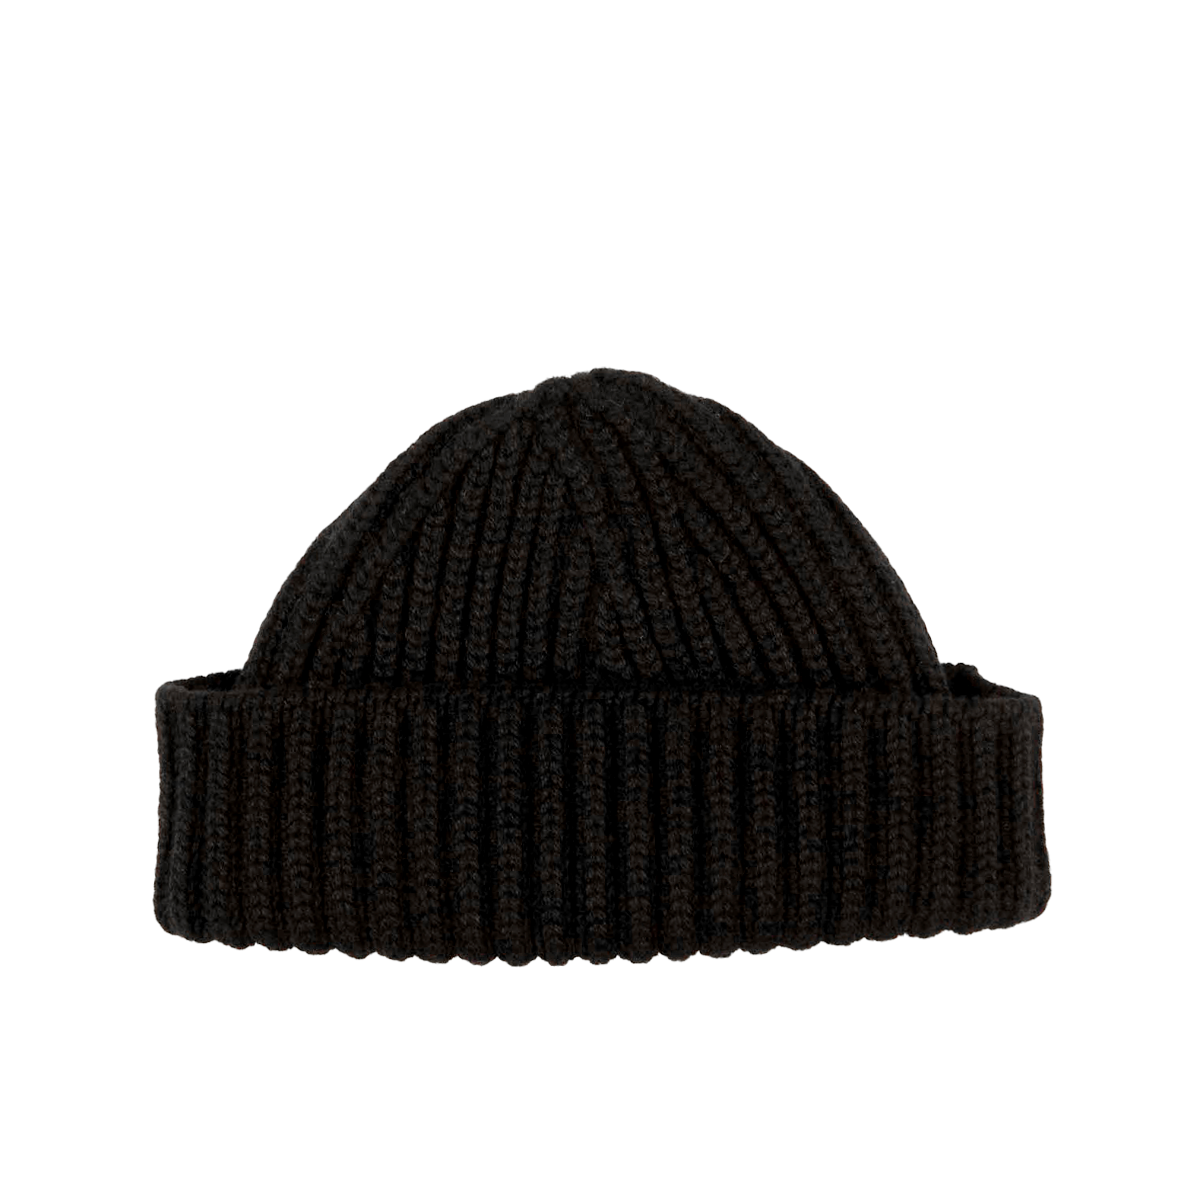 A Black Cashmere Ribbed Short Beanie made with Scotland's finest chunky cashmere thread by William Lockie.